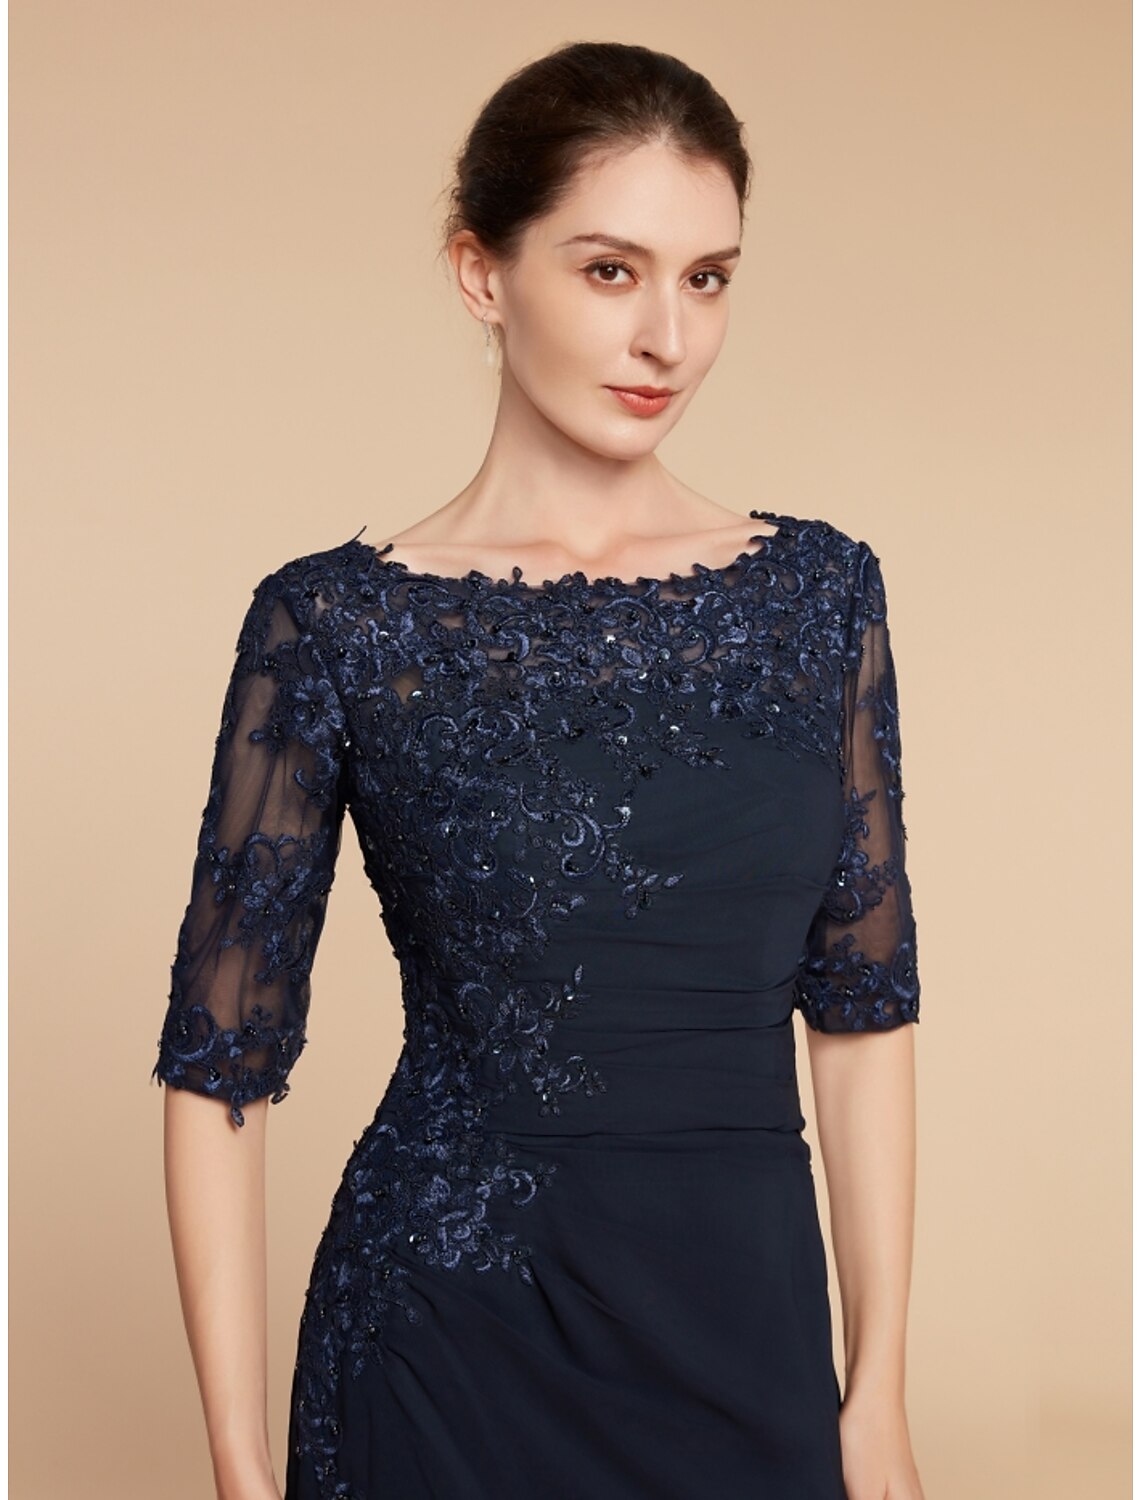 Sheath / Column Mother of the Bride Dress Wedding Guest Elegant Scoop Neck Ankle Length Chiffon Lace Half Sleeve with Sequin Ruching Solid Color